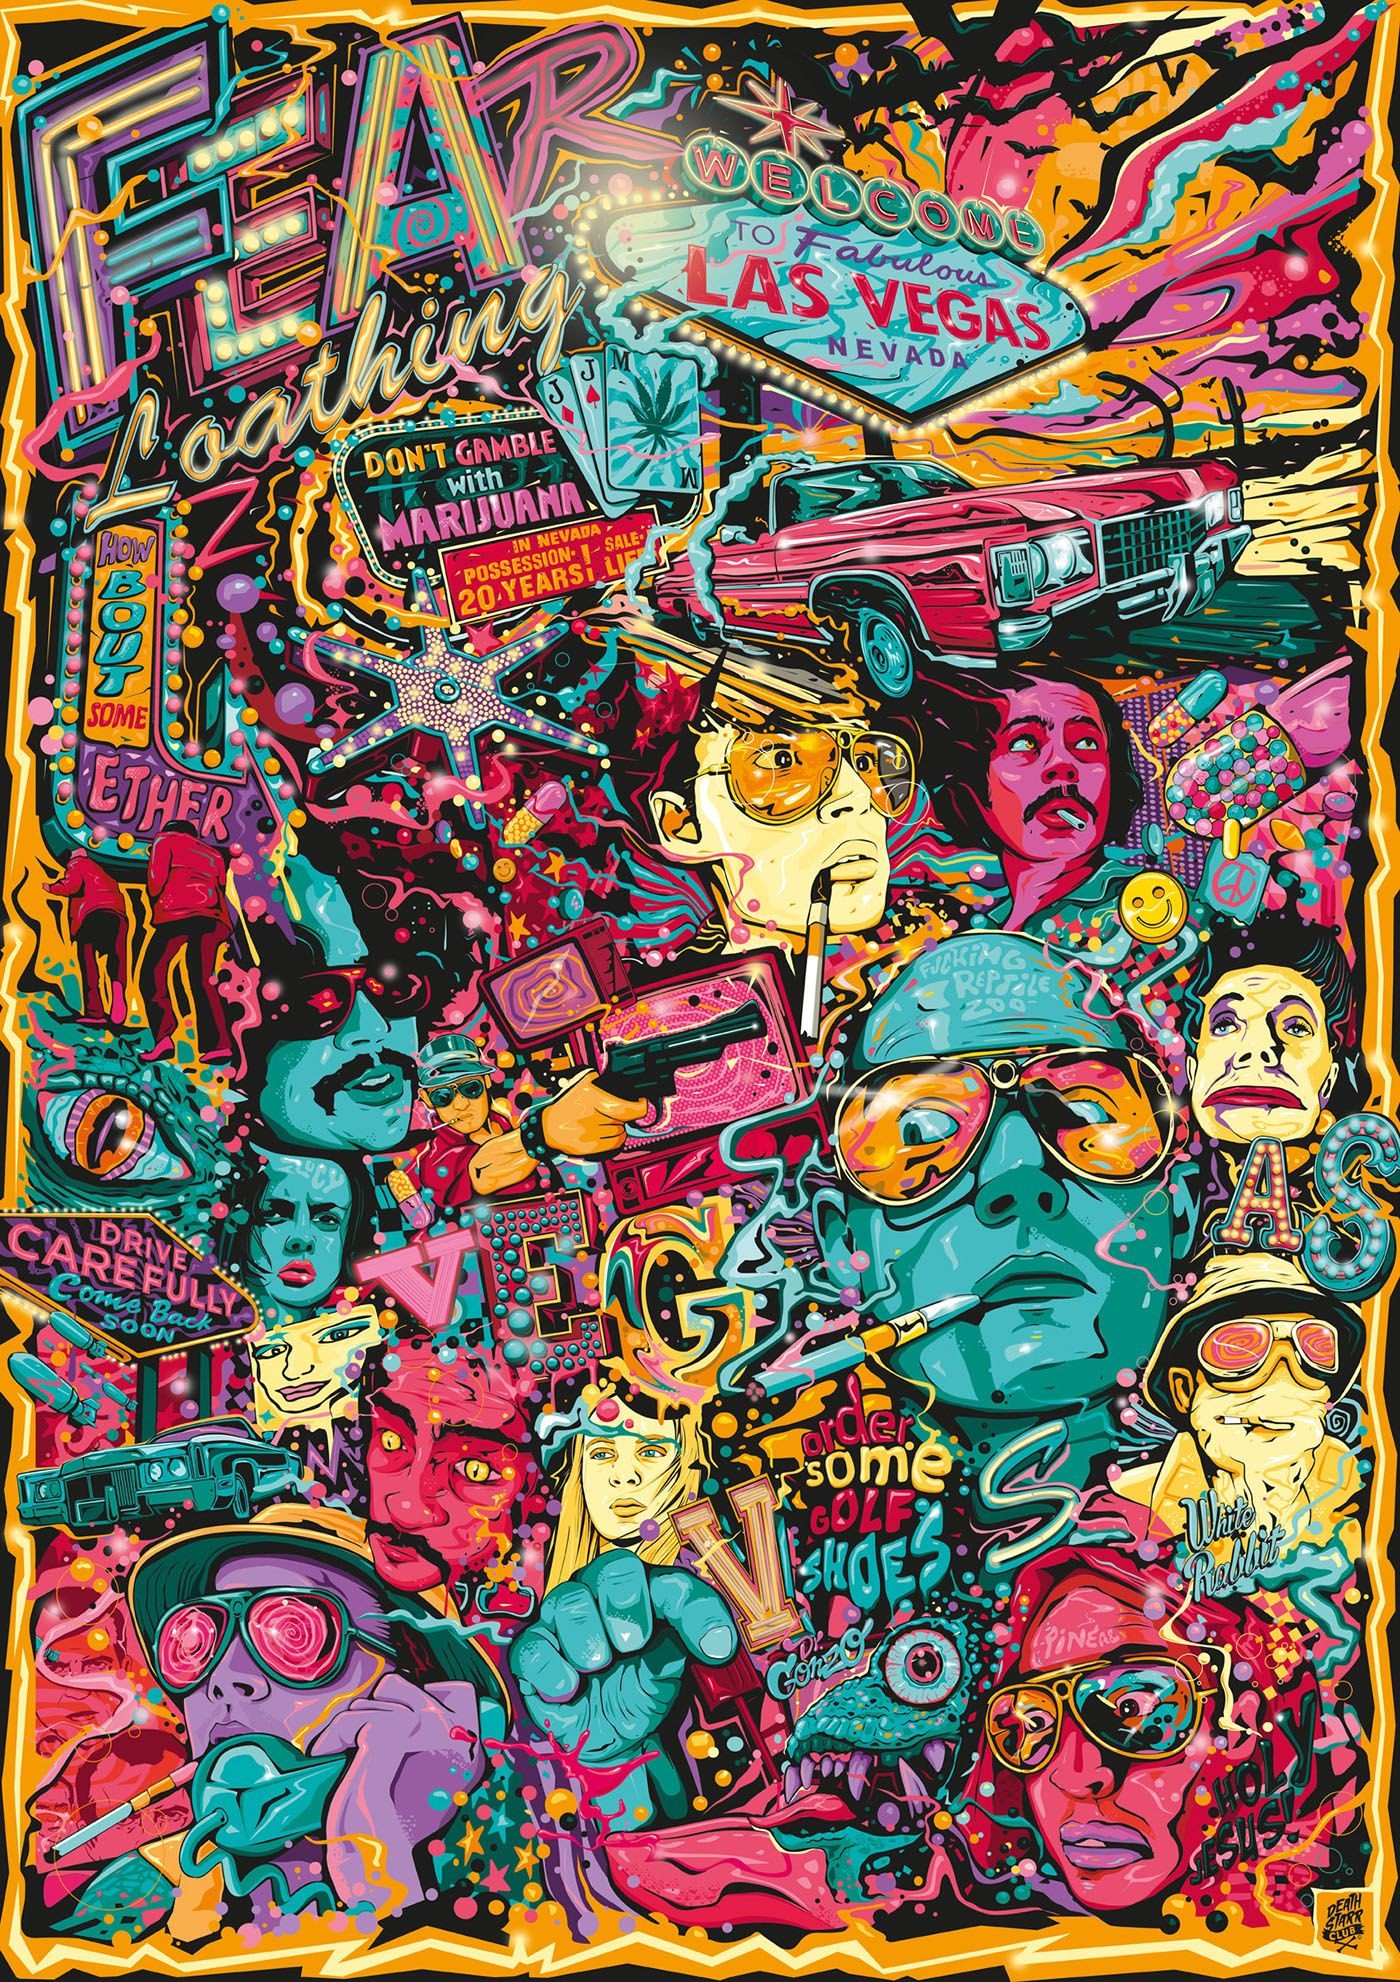 1400x1982 Fear and Loathing in Las Vegas Tribute Poster Artwork on Behance